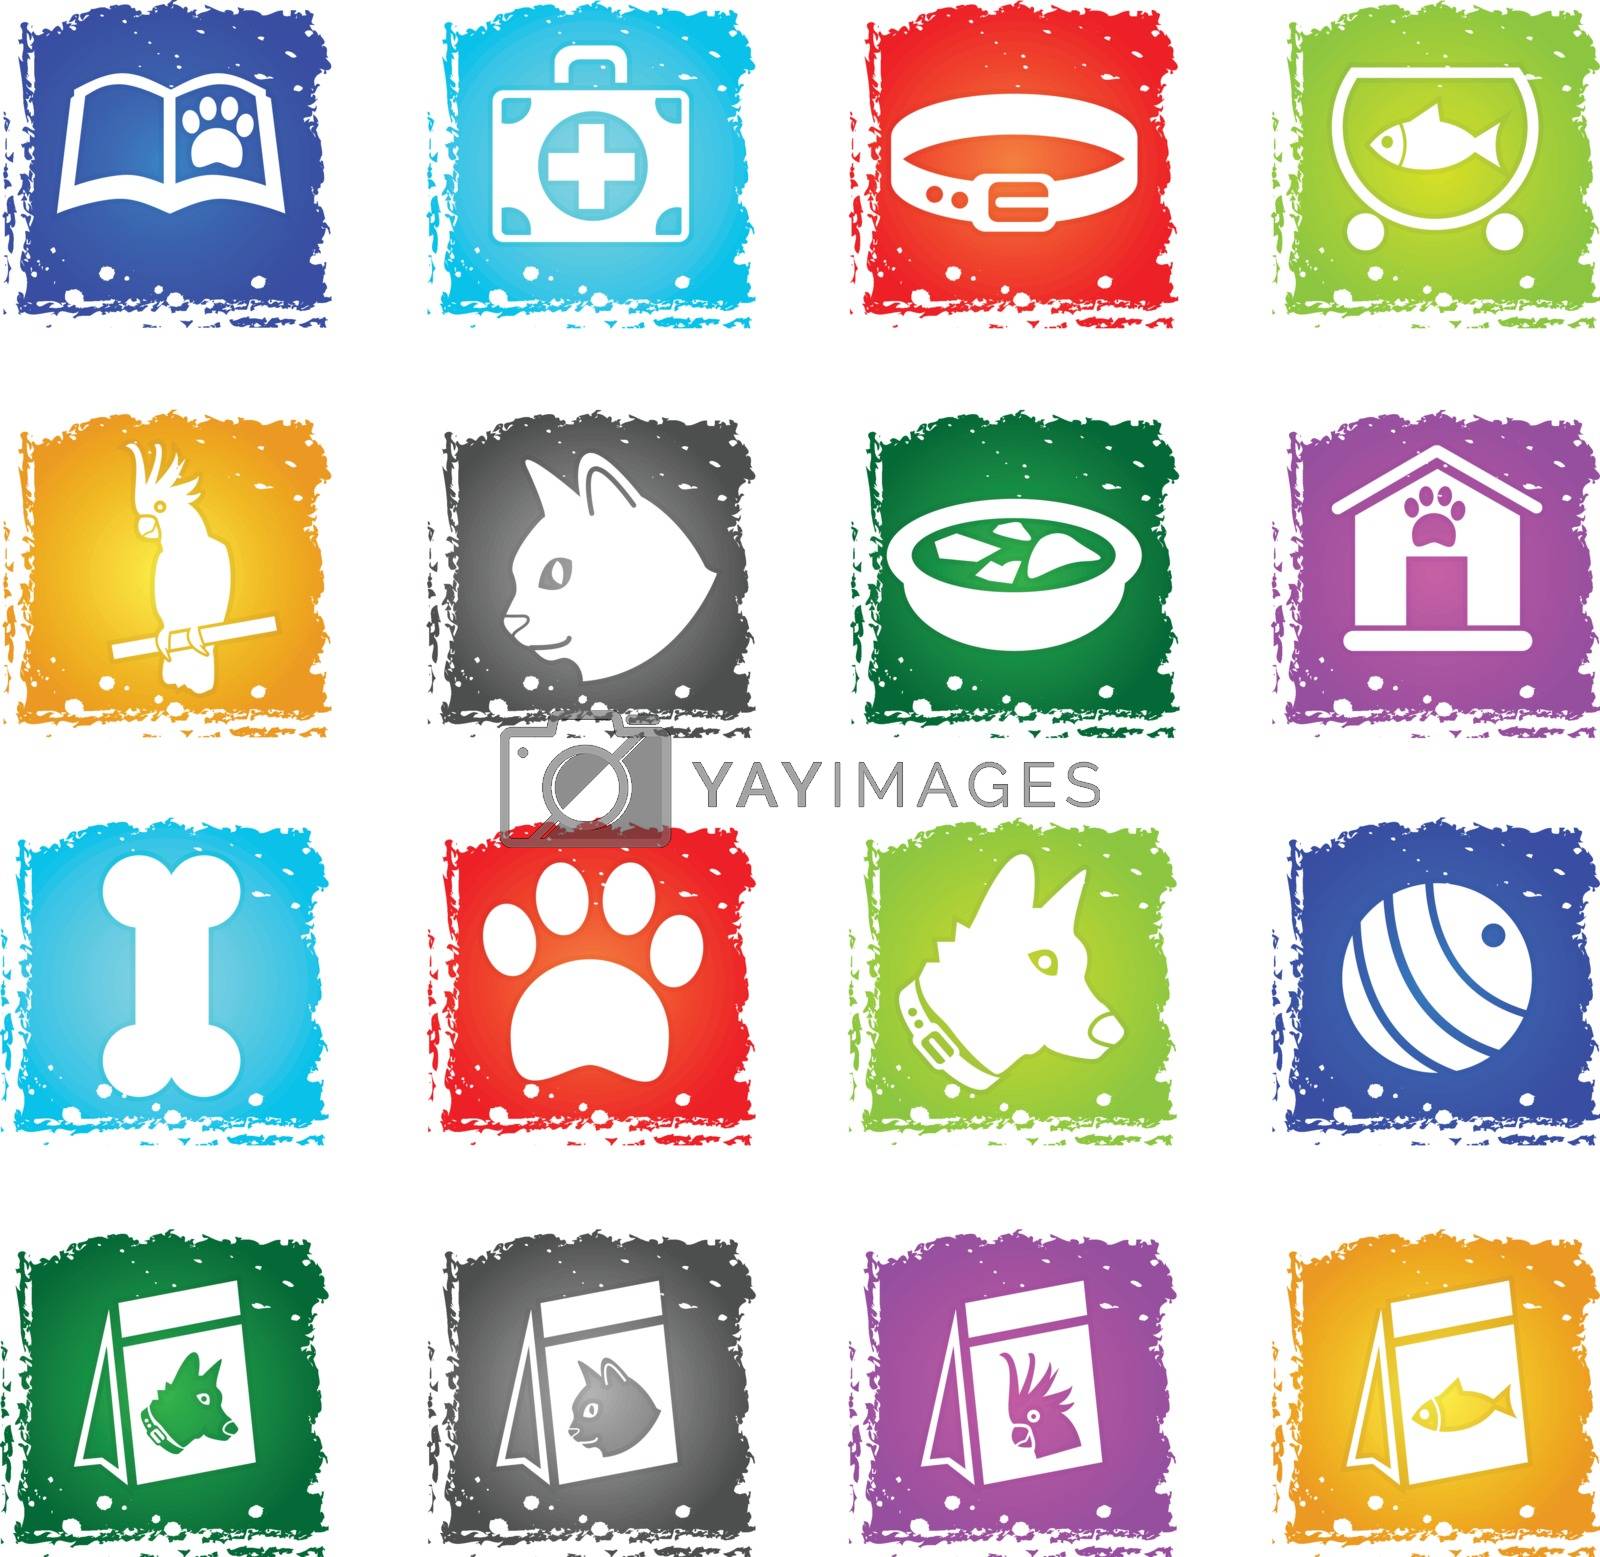 Royalty free image of goods for pets icon set by ayax